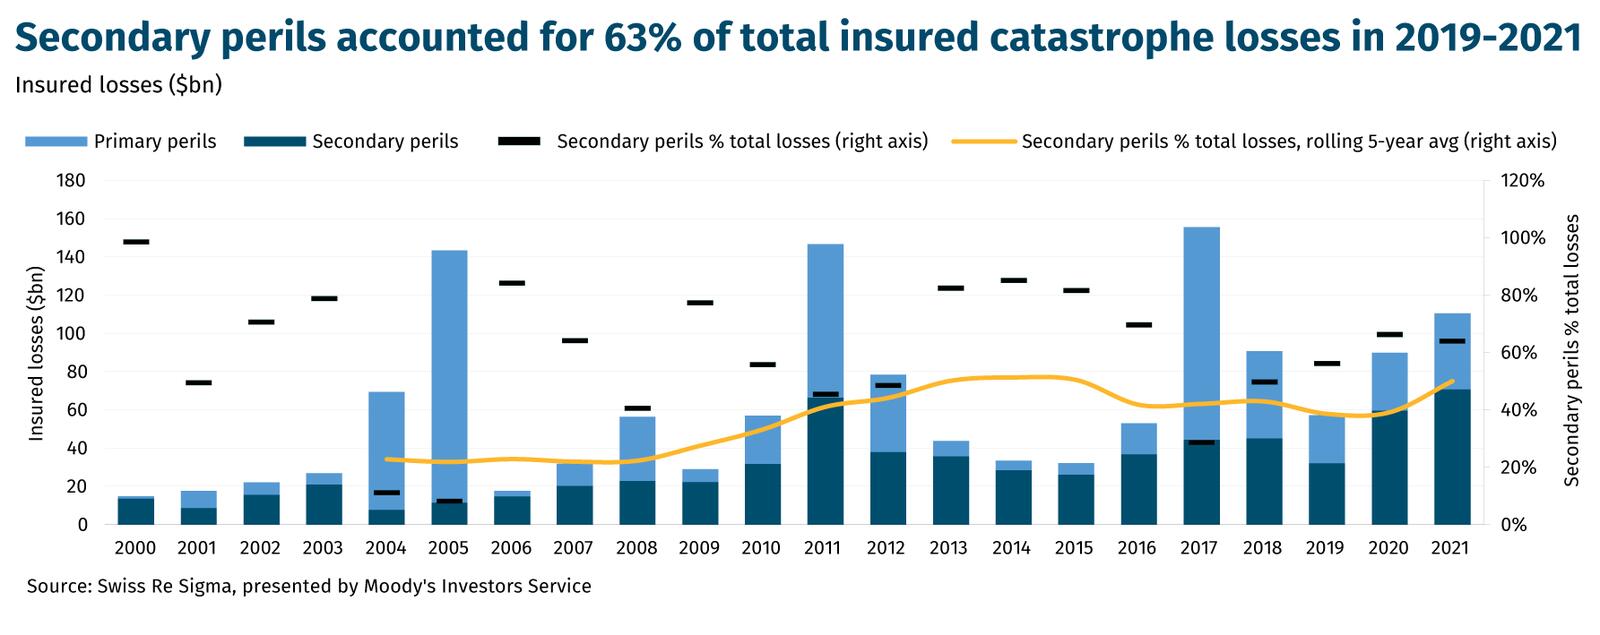 Secondary-perils-accounted-for-63%-of-total-insured-catastrophe-losses-in-2019-2021